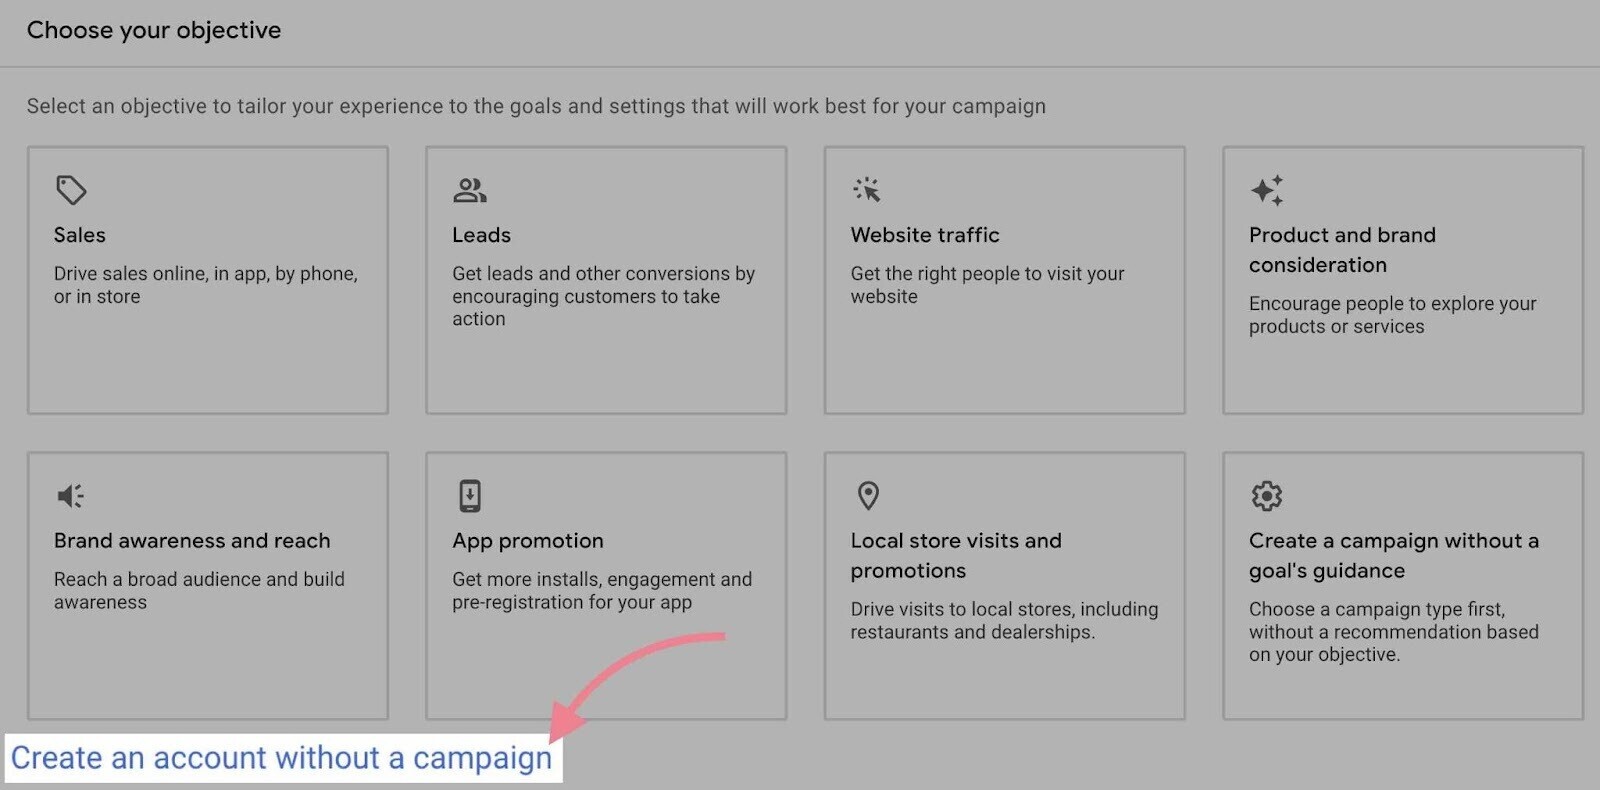 Create an account without a campaign